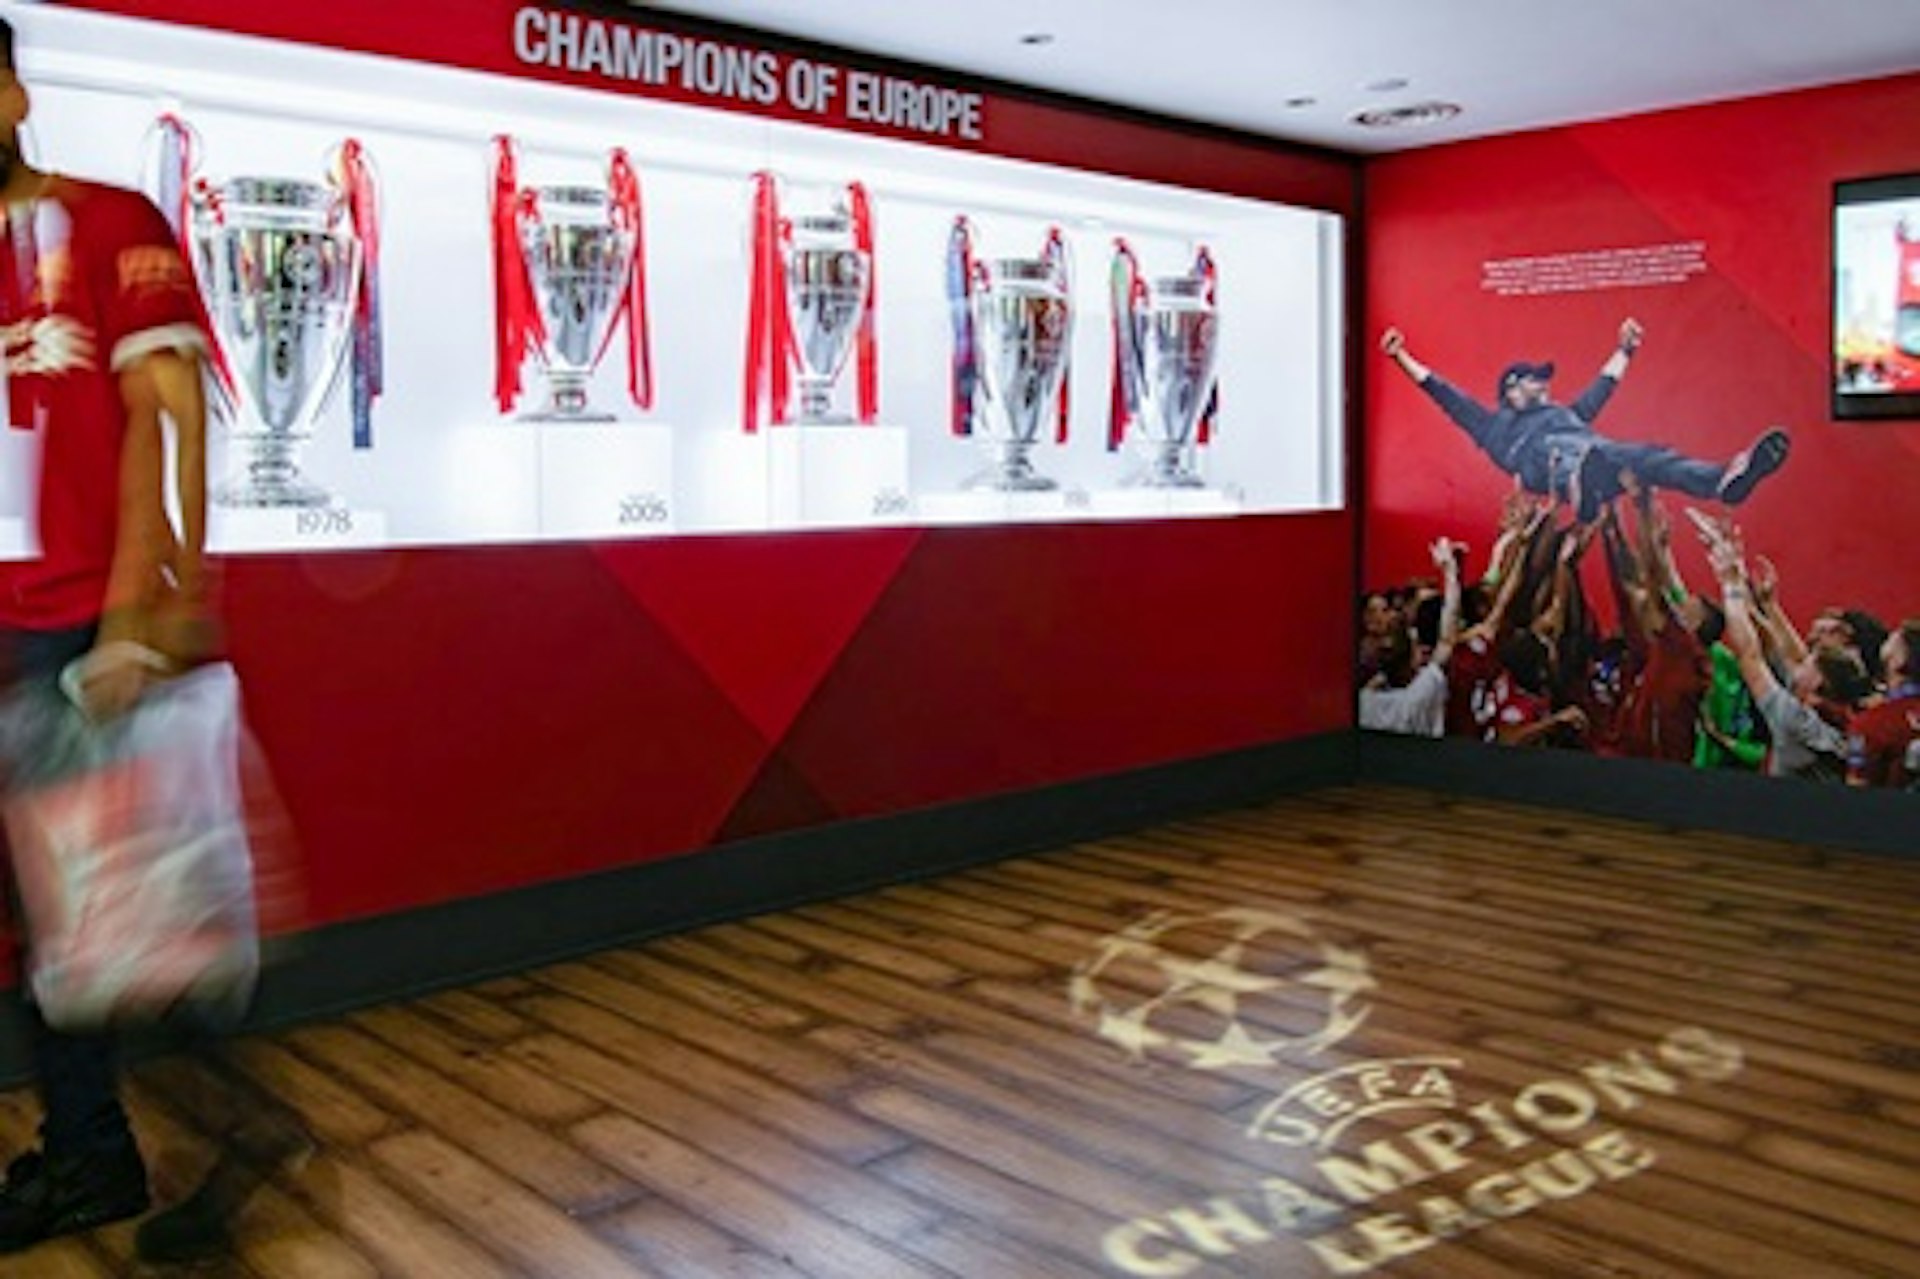 Liverpool FC Stadium Tour & Museum Entry for One Adult and One Child 4